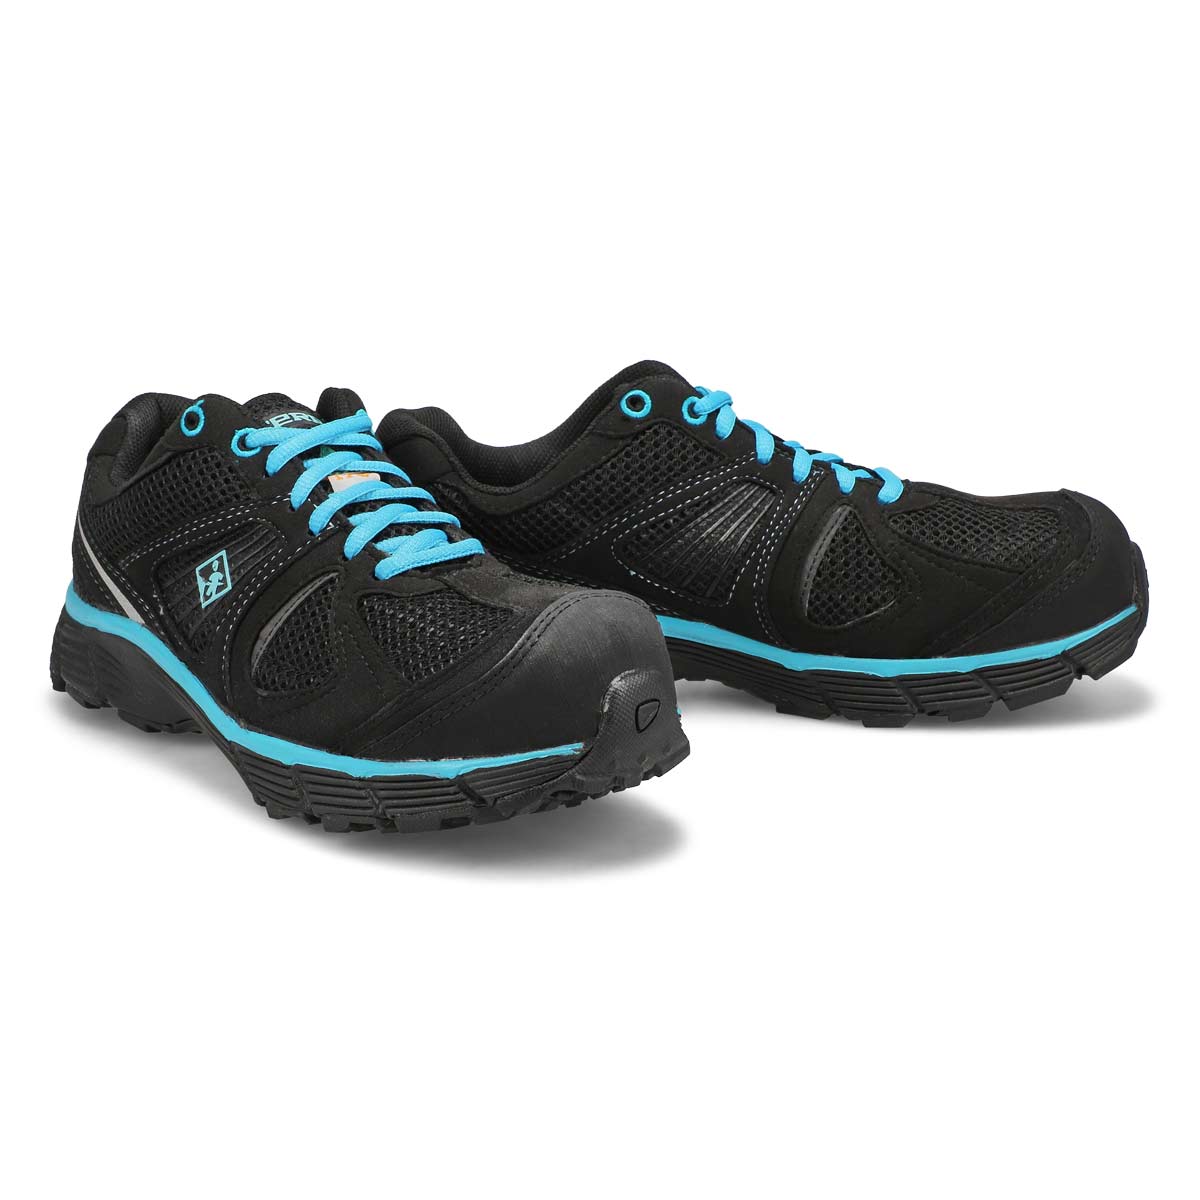 Women's PACER 2 black/blue lace up CSA sneakers